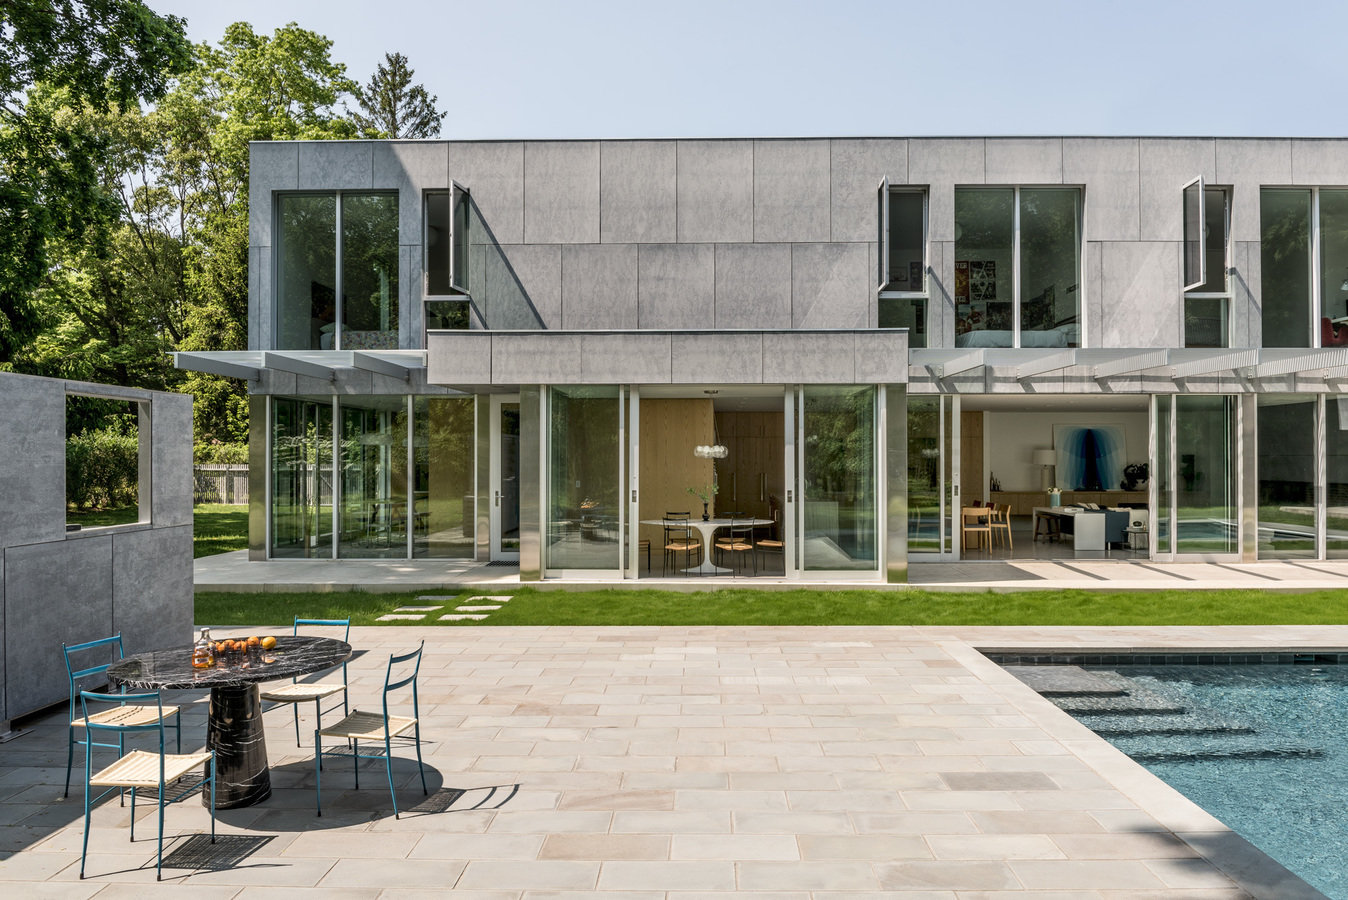 Rear façade of modern two-level house in cement and glass, surrounding lawn, stone patio with table and chairs, and pool.